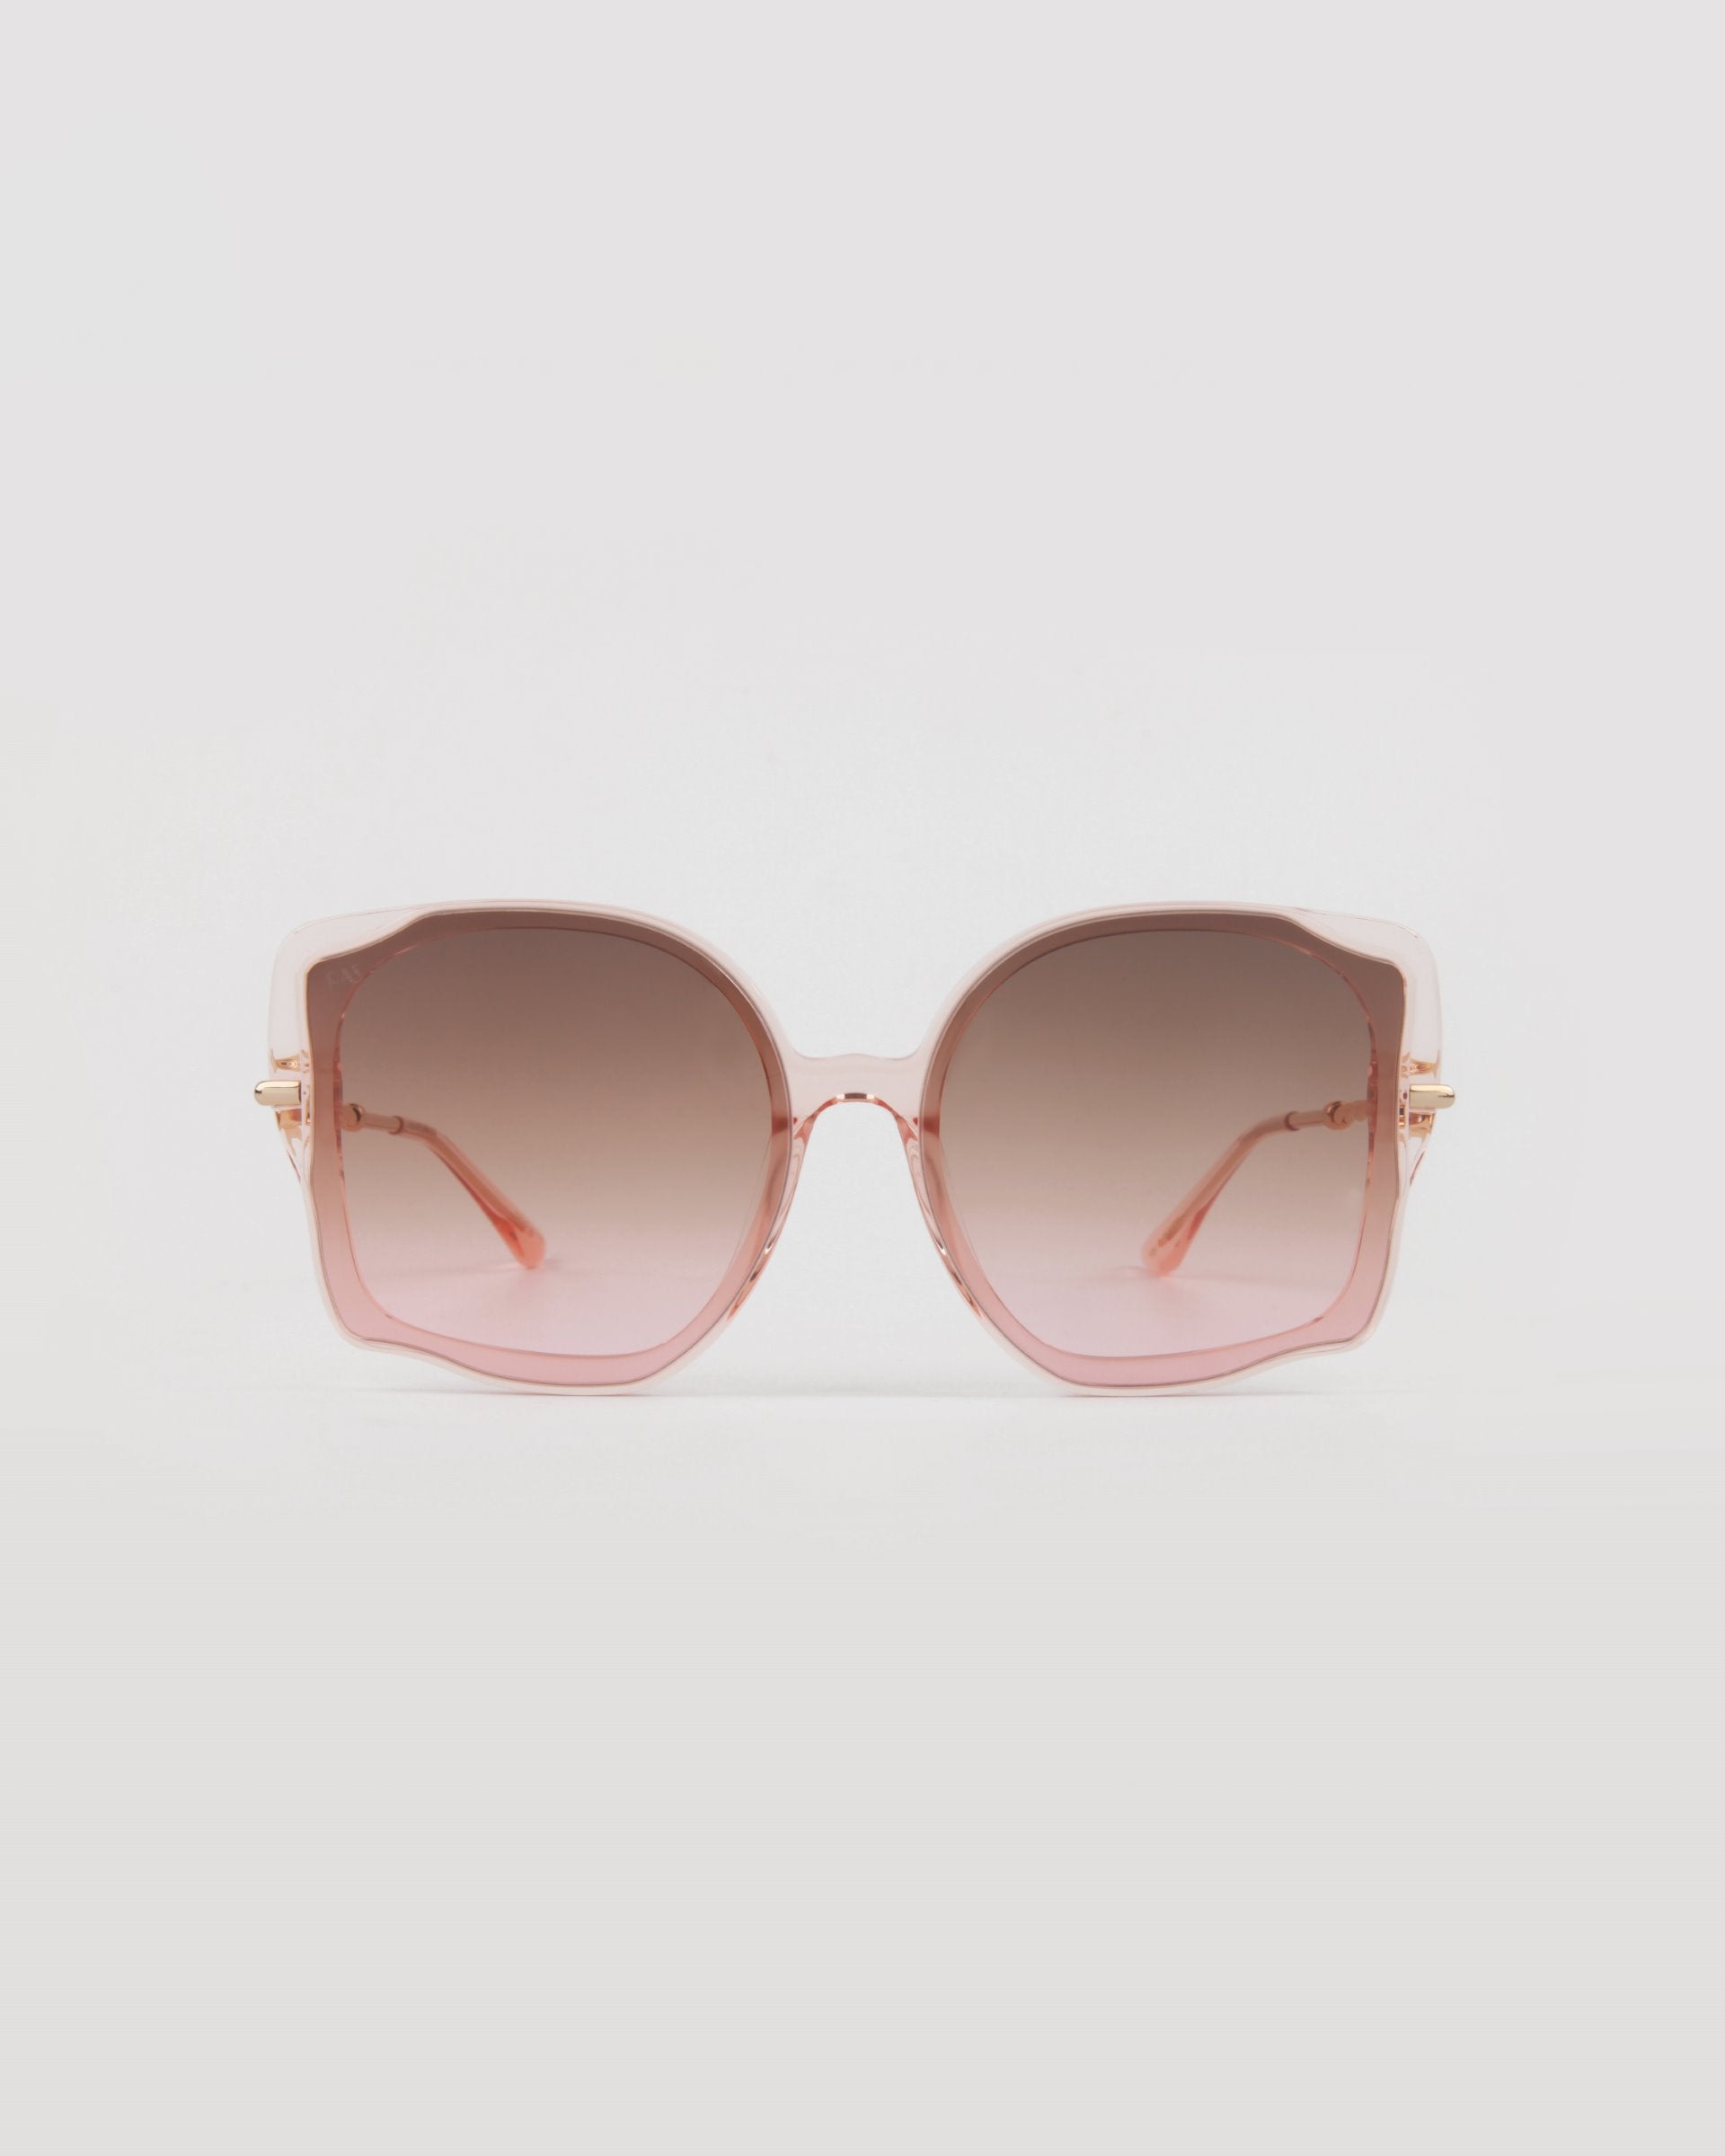 A pair of stylish, oversized frame sunglasses with pale pink handmade acetate frames and gradient lenses, transitioning from darker at the top to lighter at the bottom, set against a plain white background. These are the Fahrenheit by For Art&#39;s Sake®.